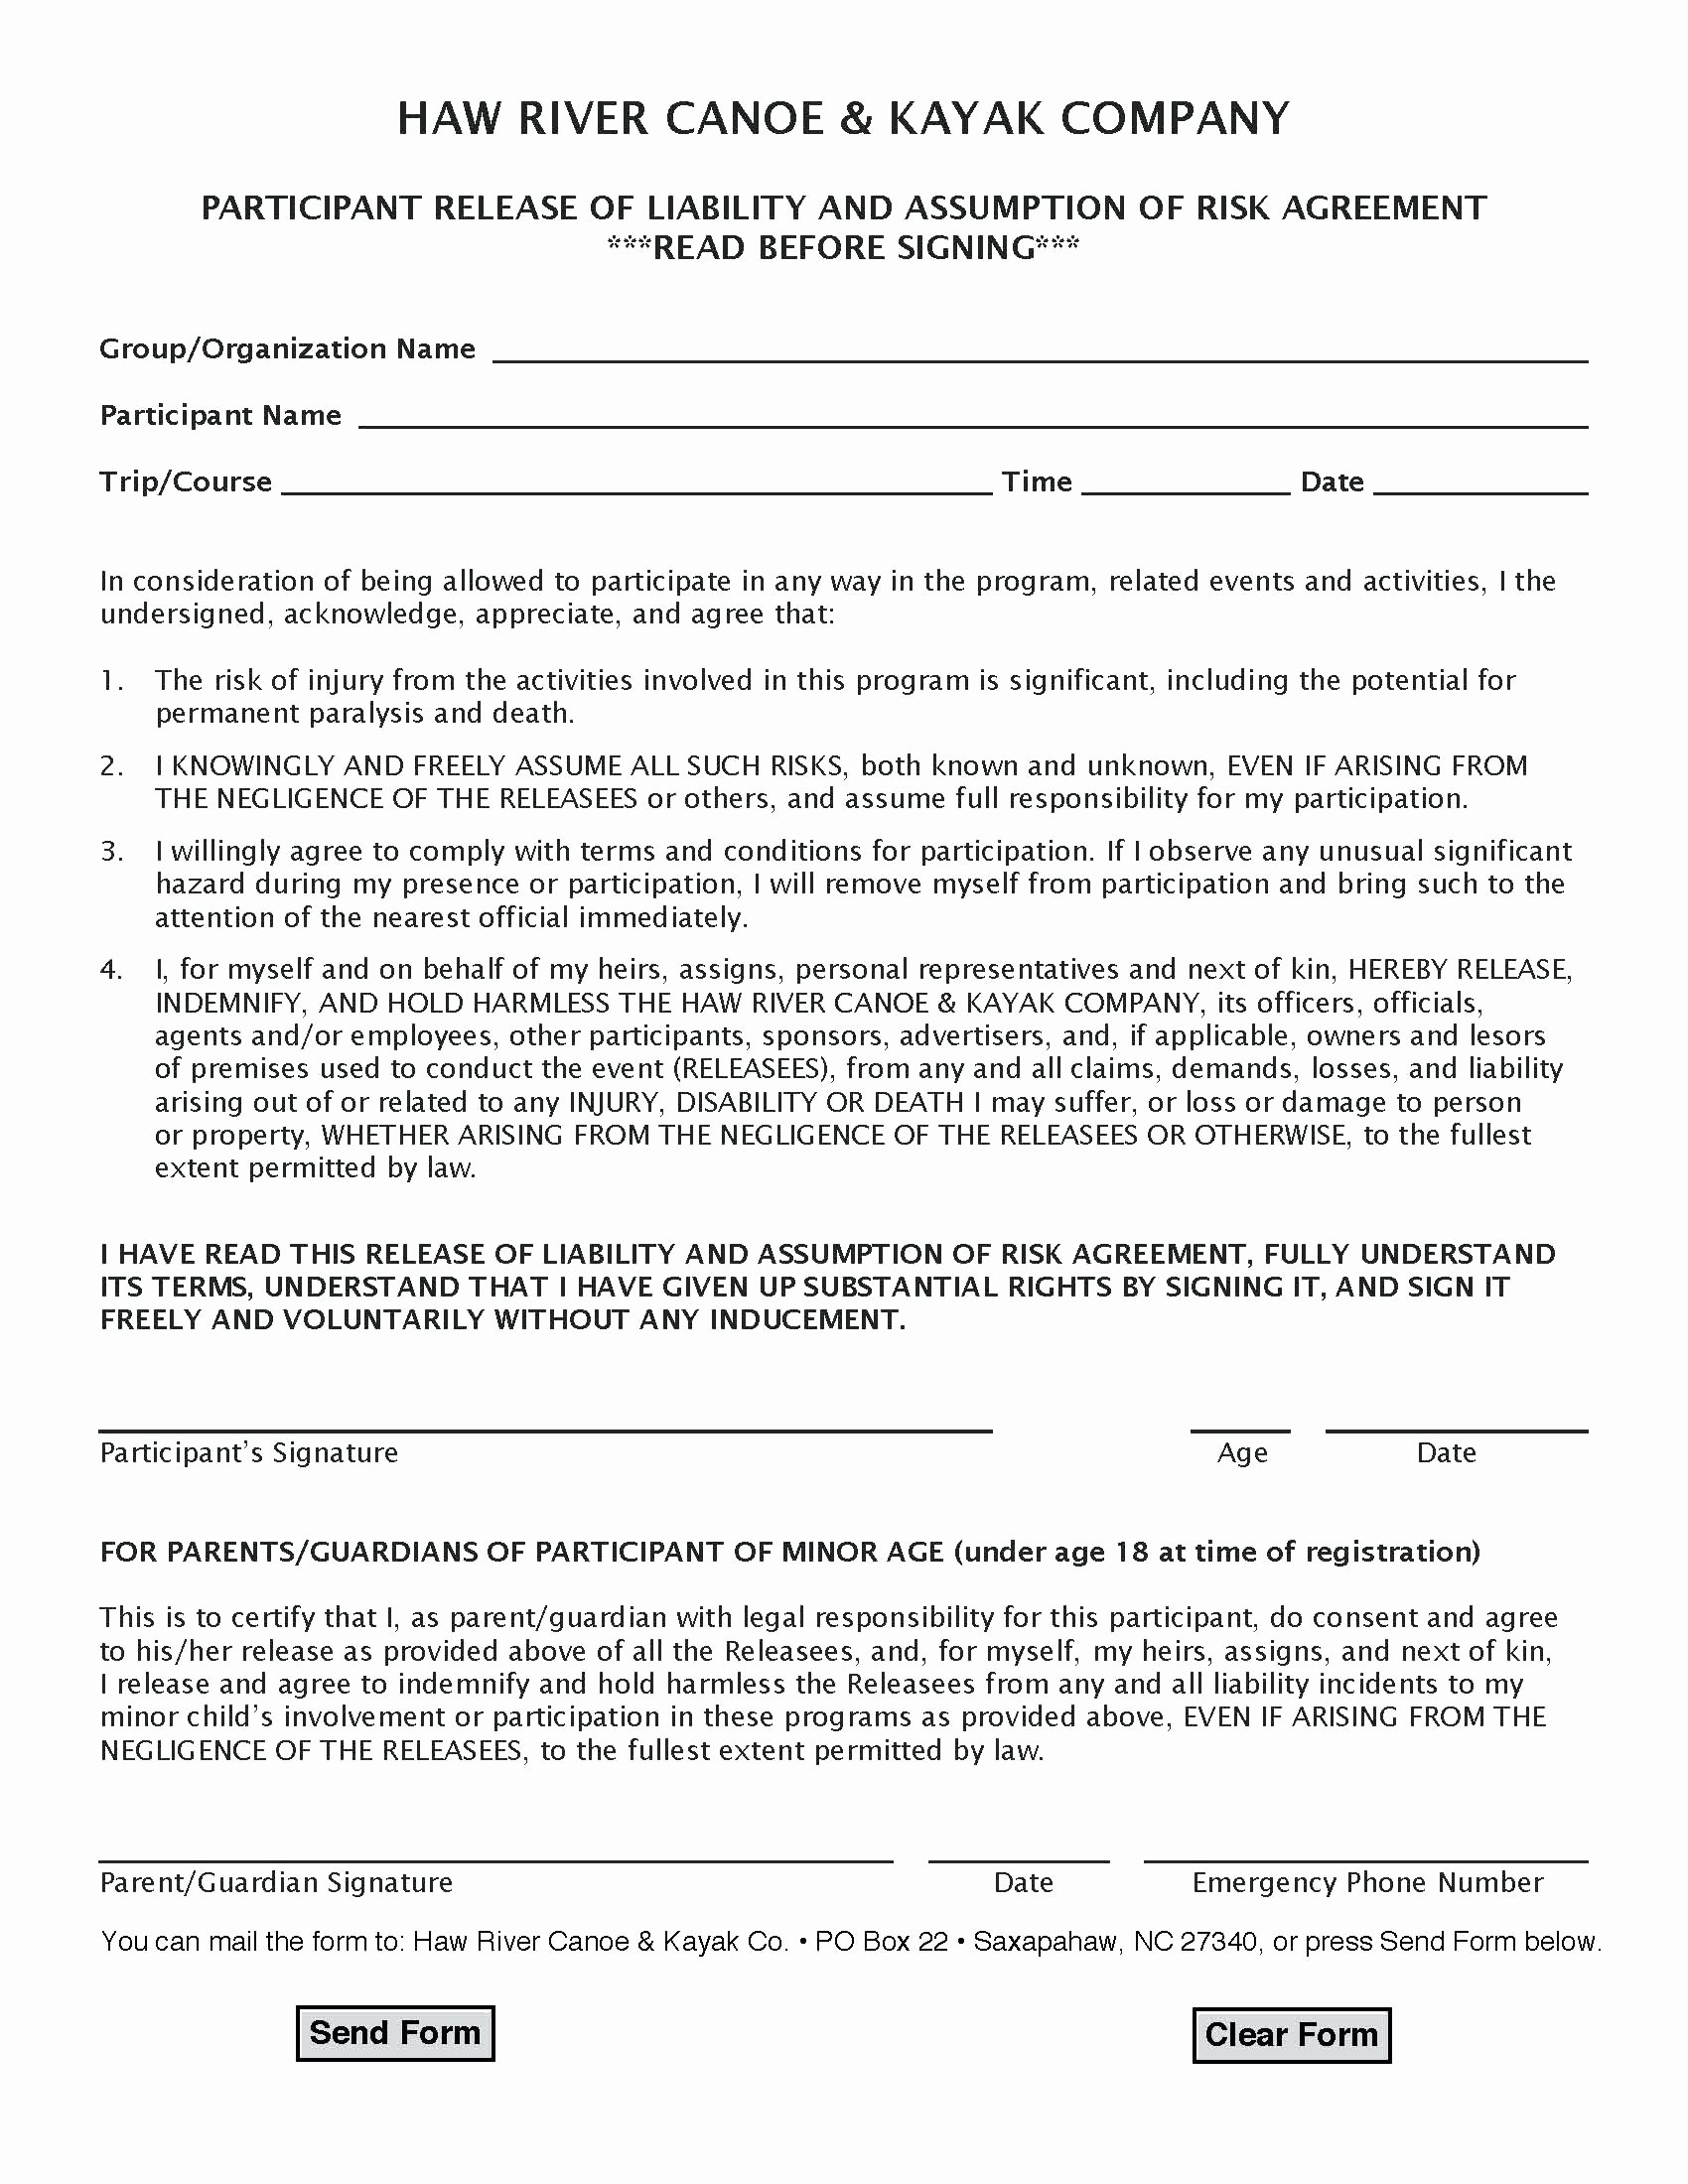 waiver form template